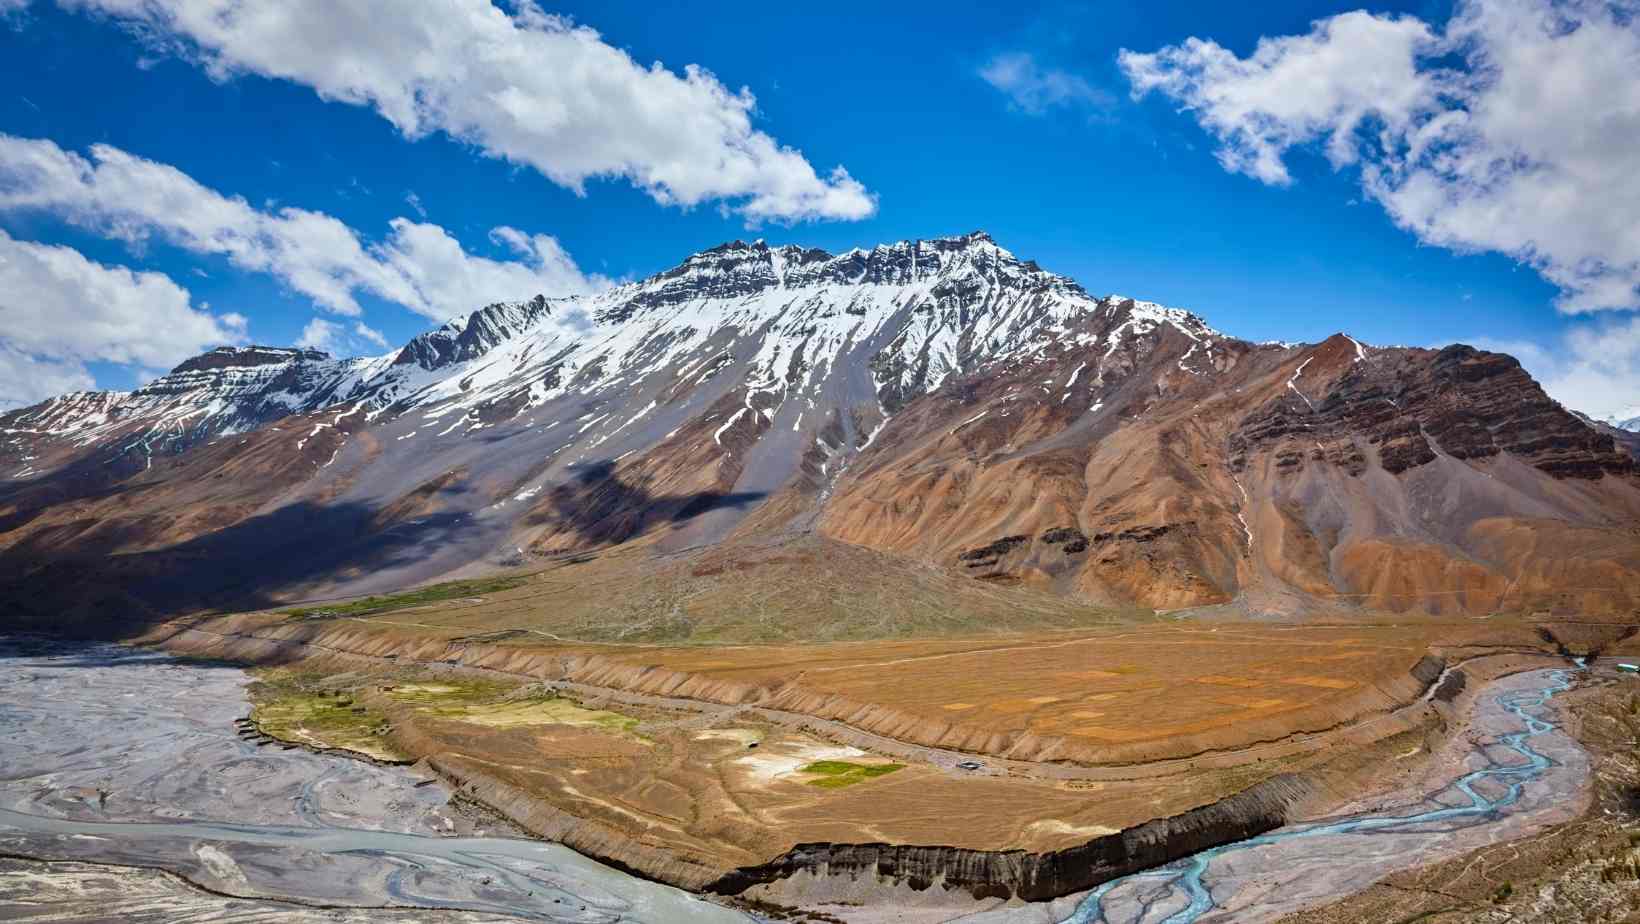 Spiti valley of Himachal Pradesh - Best Sites For Camping In India